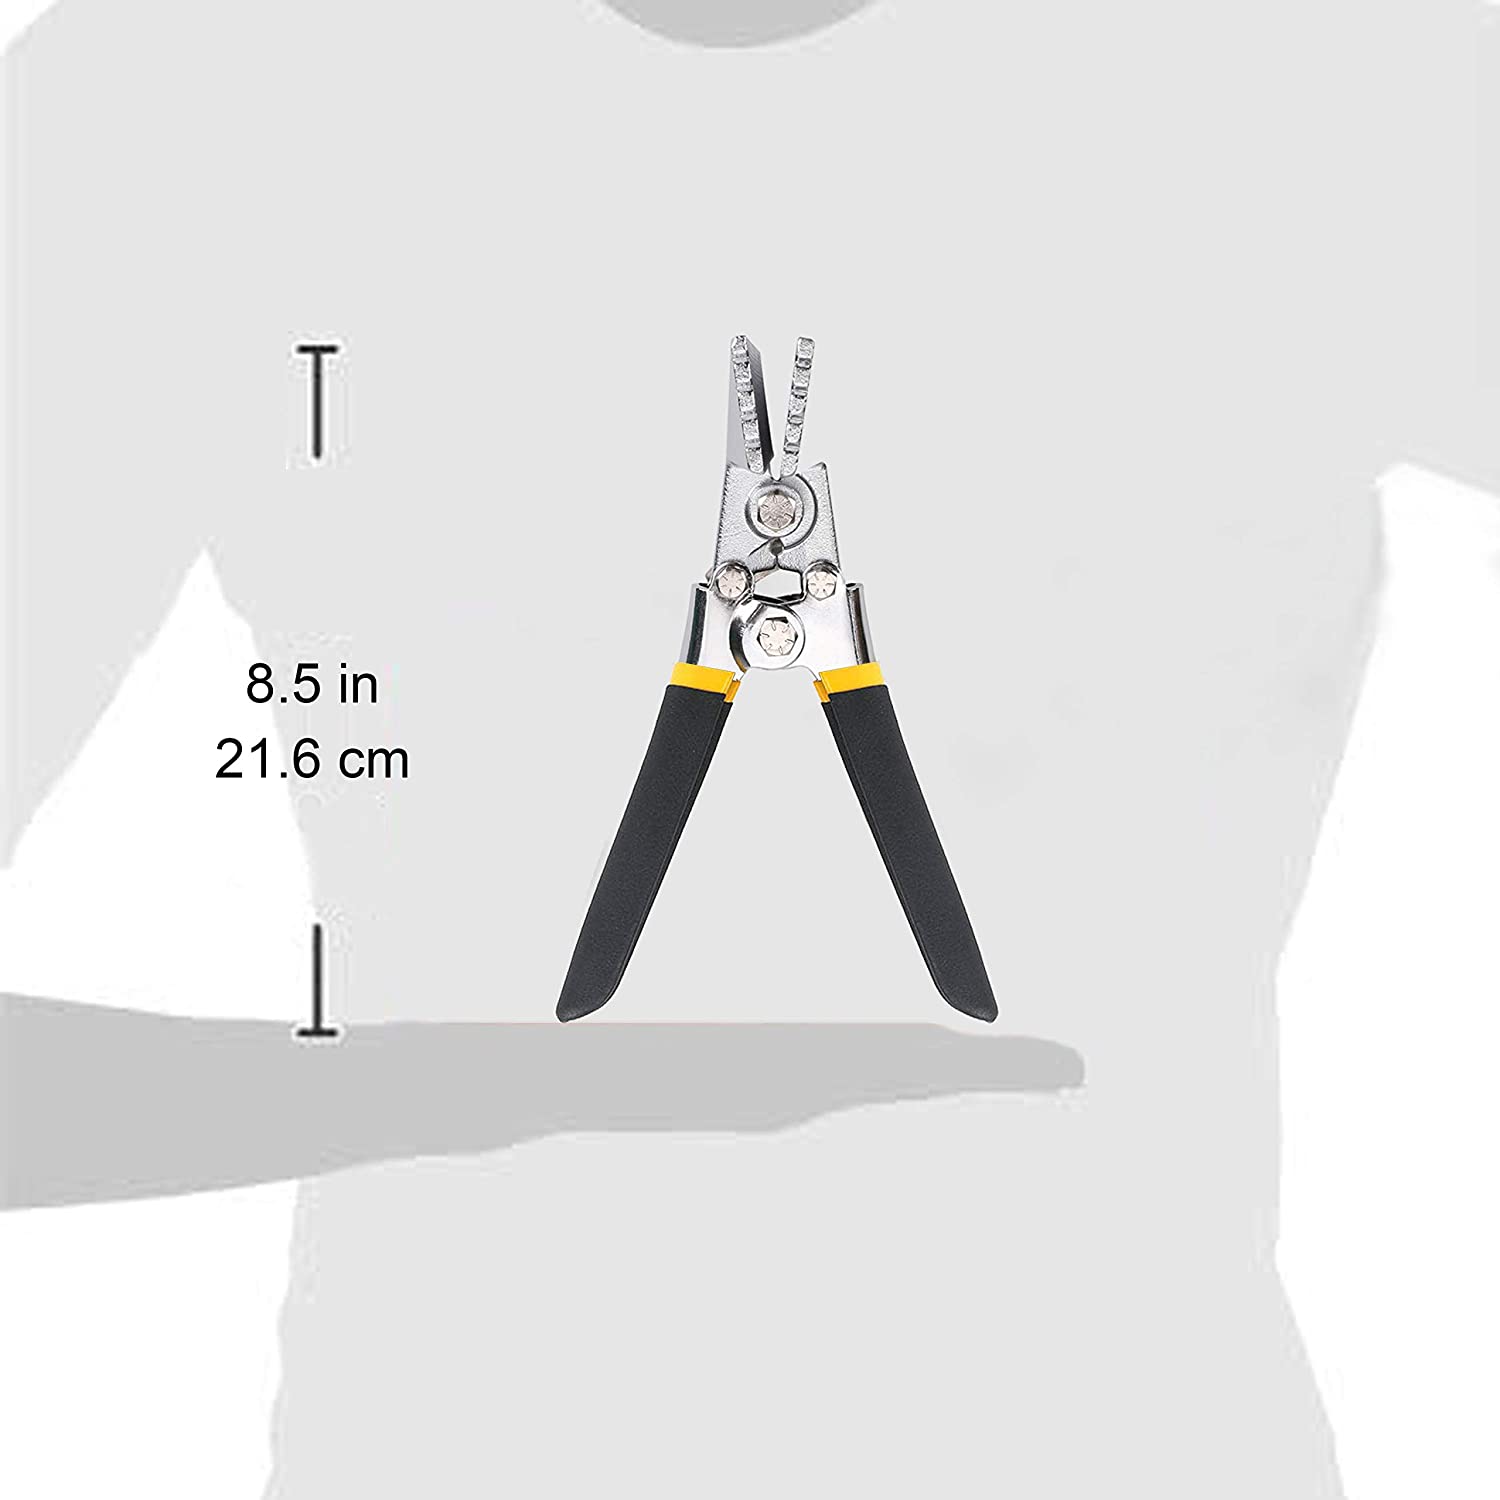 A person holding a pair of Perma Cover High Quality Sheet Metal Hand Seamers - Multiple Sizes Available, with black and yellow handles, measuring 8.5 inches (21.6 cm) in length. The image highlights the dimensions next to the tool, which could also be ideal for bending seaming flattening tasks in sheet metal work.